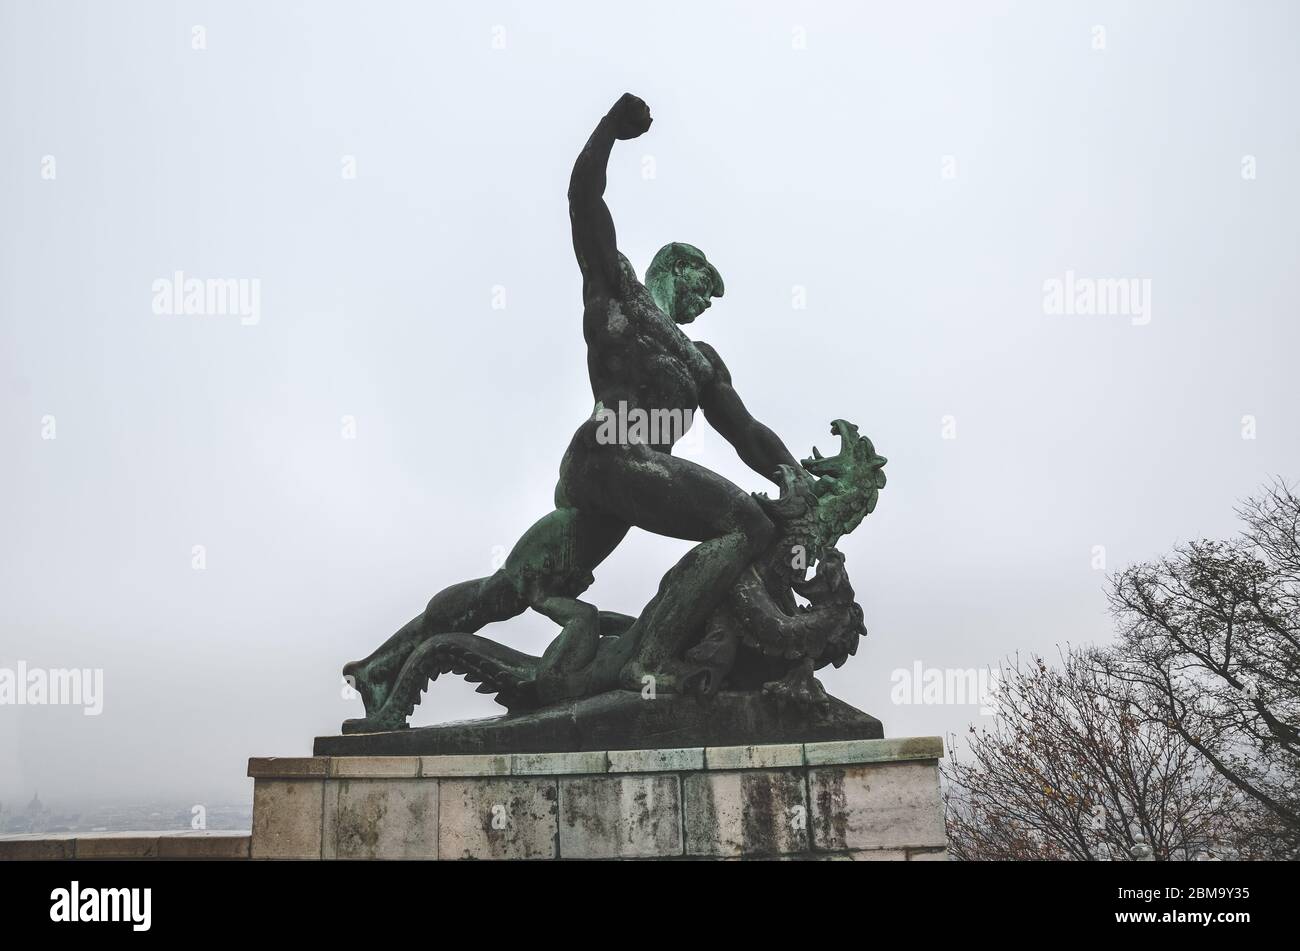 Budapest, Hungary - Nov 6, 2019: Side statue of the Liberty Statue on Gellert hill in Budapest in Hungary. Man slaying and strangling dragon, mythical expression of the fight between good and evil. Stock Photo